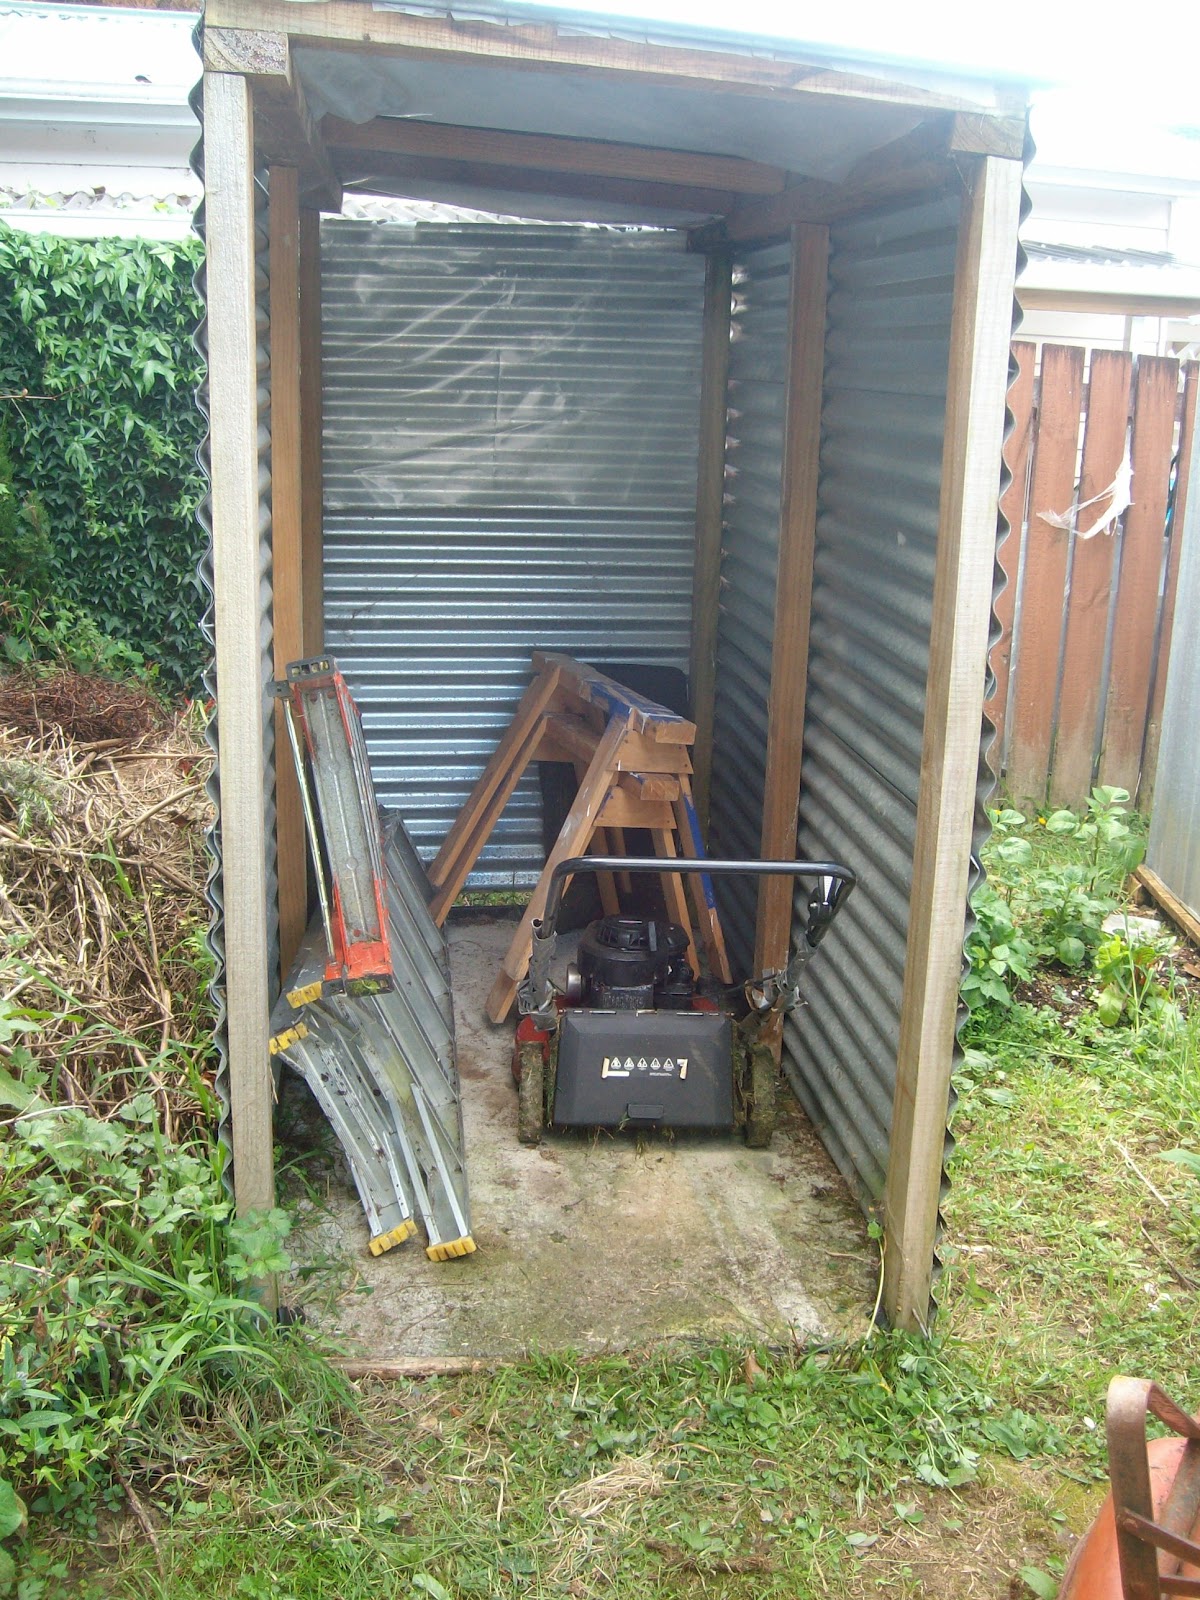 Bobbs: Build a lawn mower shed